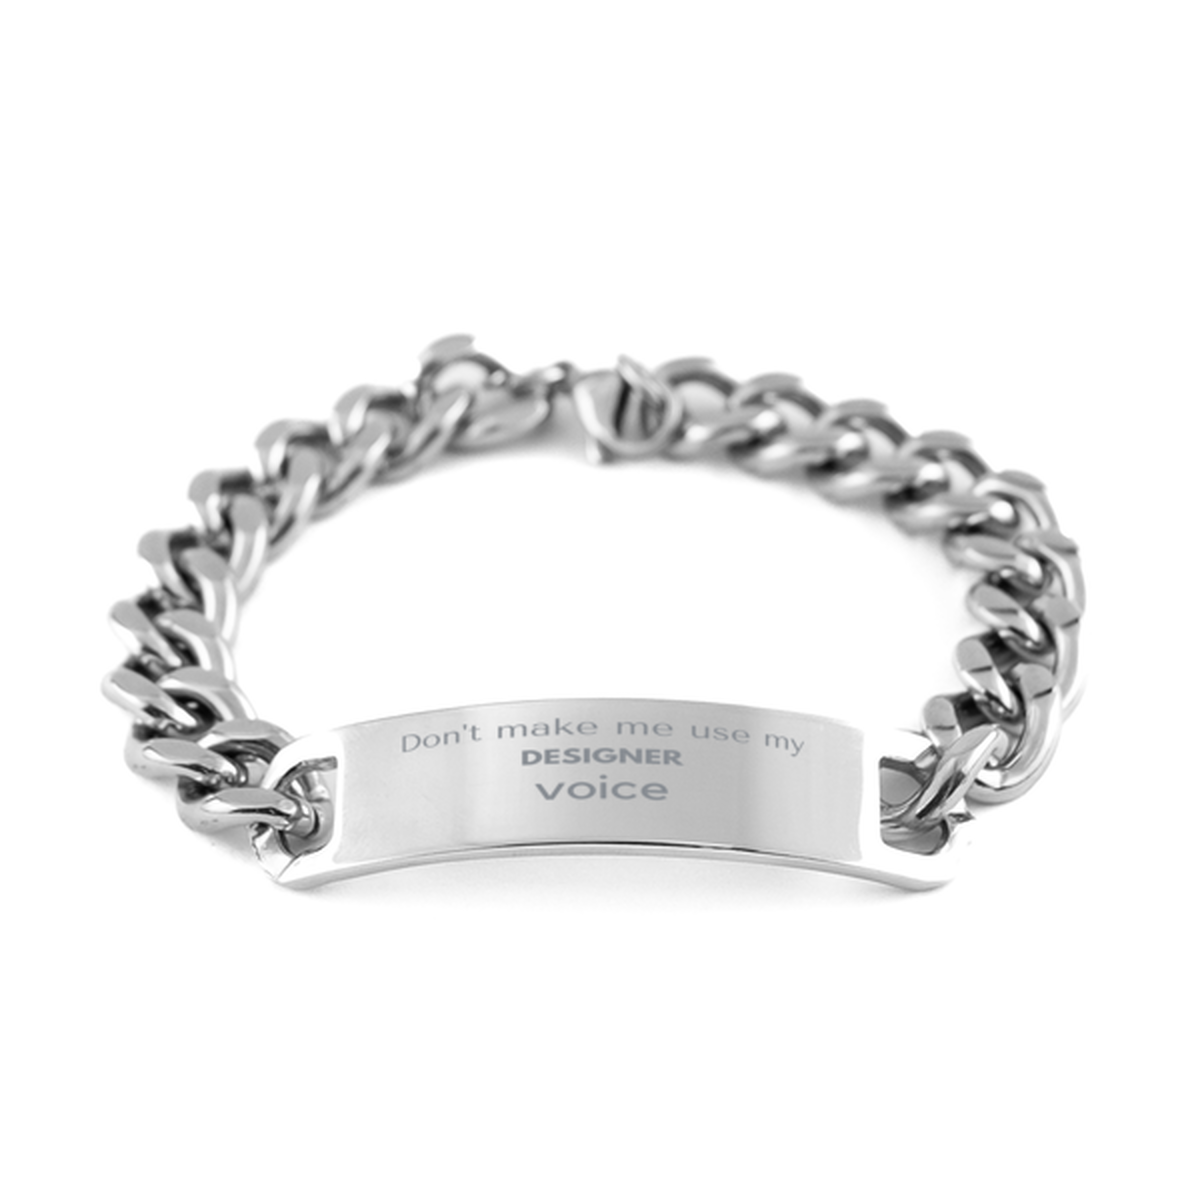 Don't make me use my Designer voice, Sarcasm Designer Gifts, Christmas Designer Cuban Chain Stainless Steel Bracelet Birthday Unique Gifts For Designer Coworkers, Men, Women, Colleague, Friends